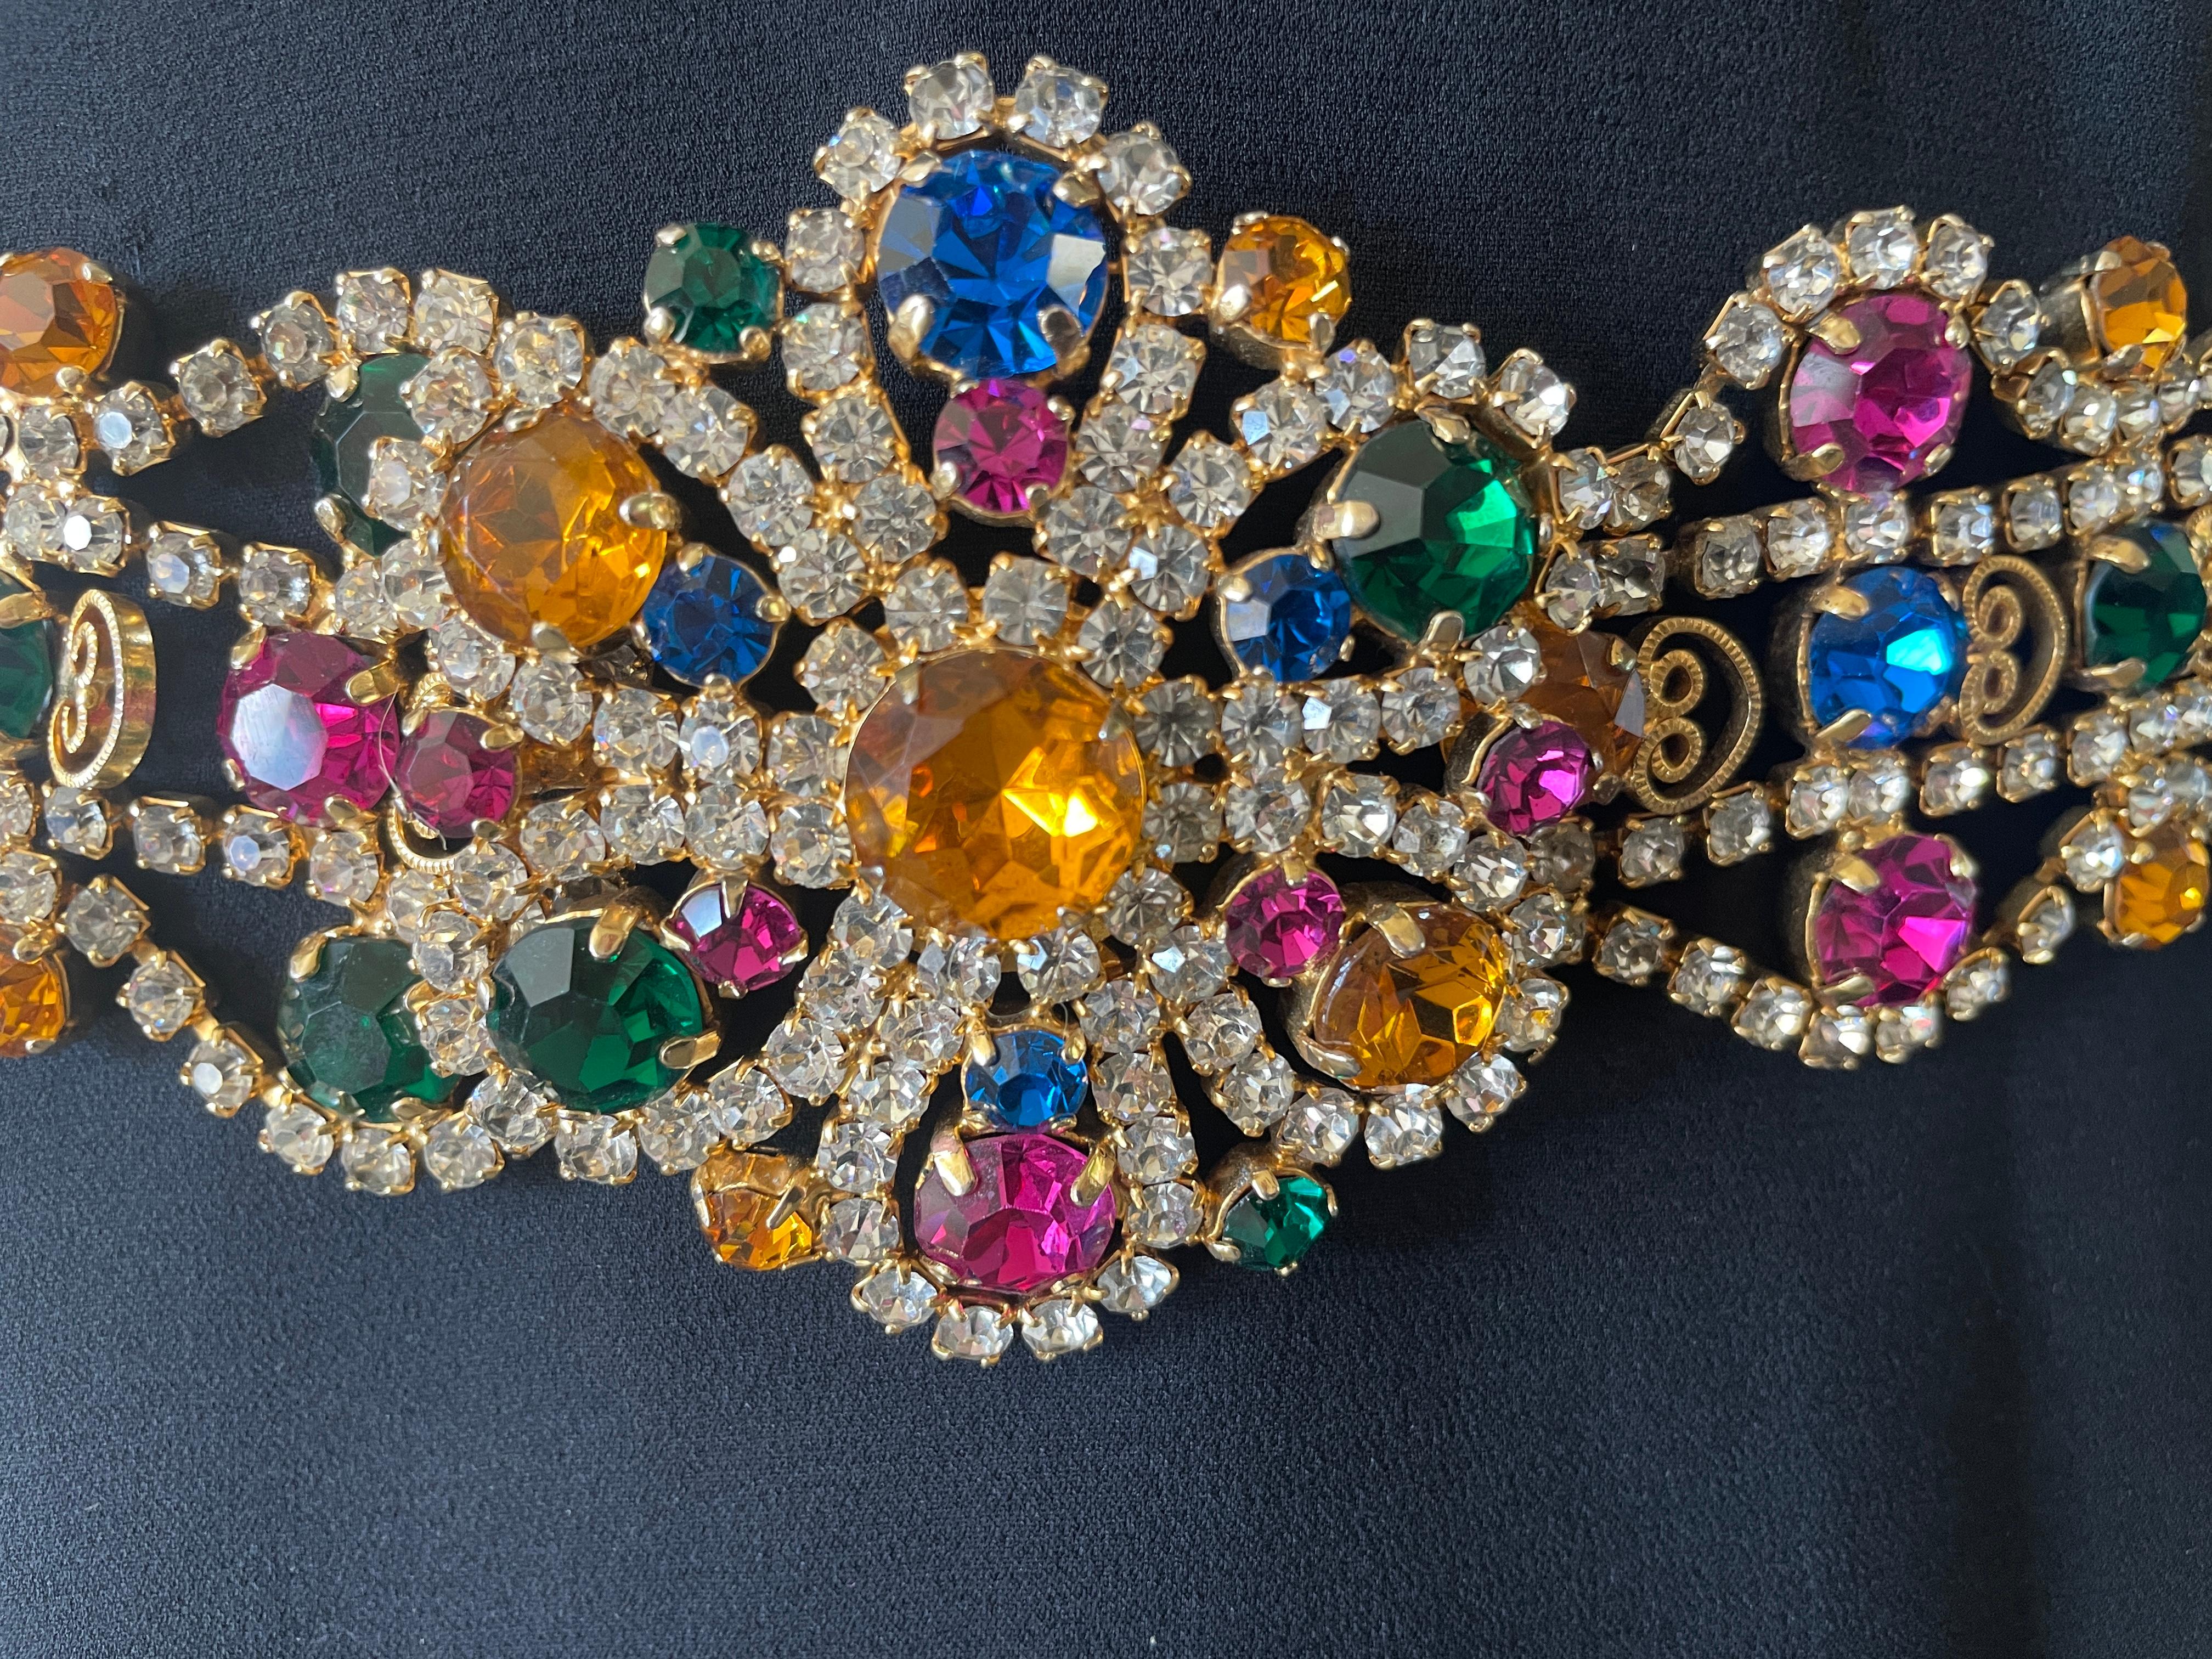 Kenneth Jay Lane Gobsmacking Vintage Crystal and Gemstone Belt
This is a sensational piece. 
Crystal with topaz , saphire, emerald  and ruby crystals
Excellent condition
Will fit up to a 32